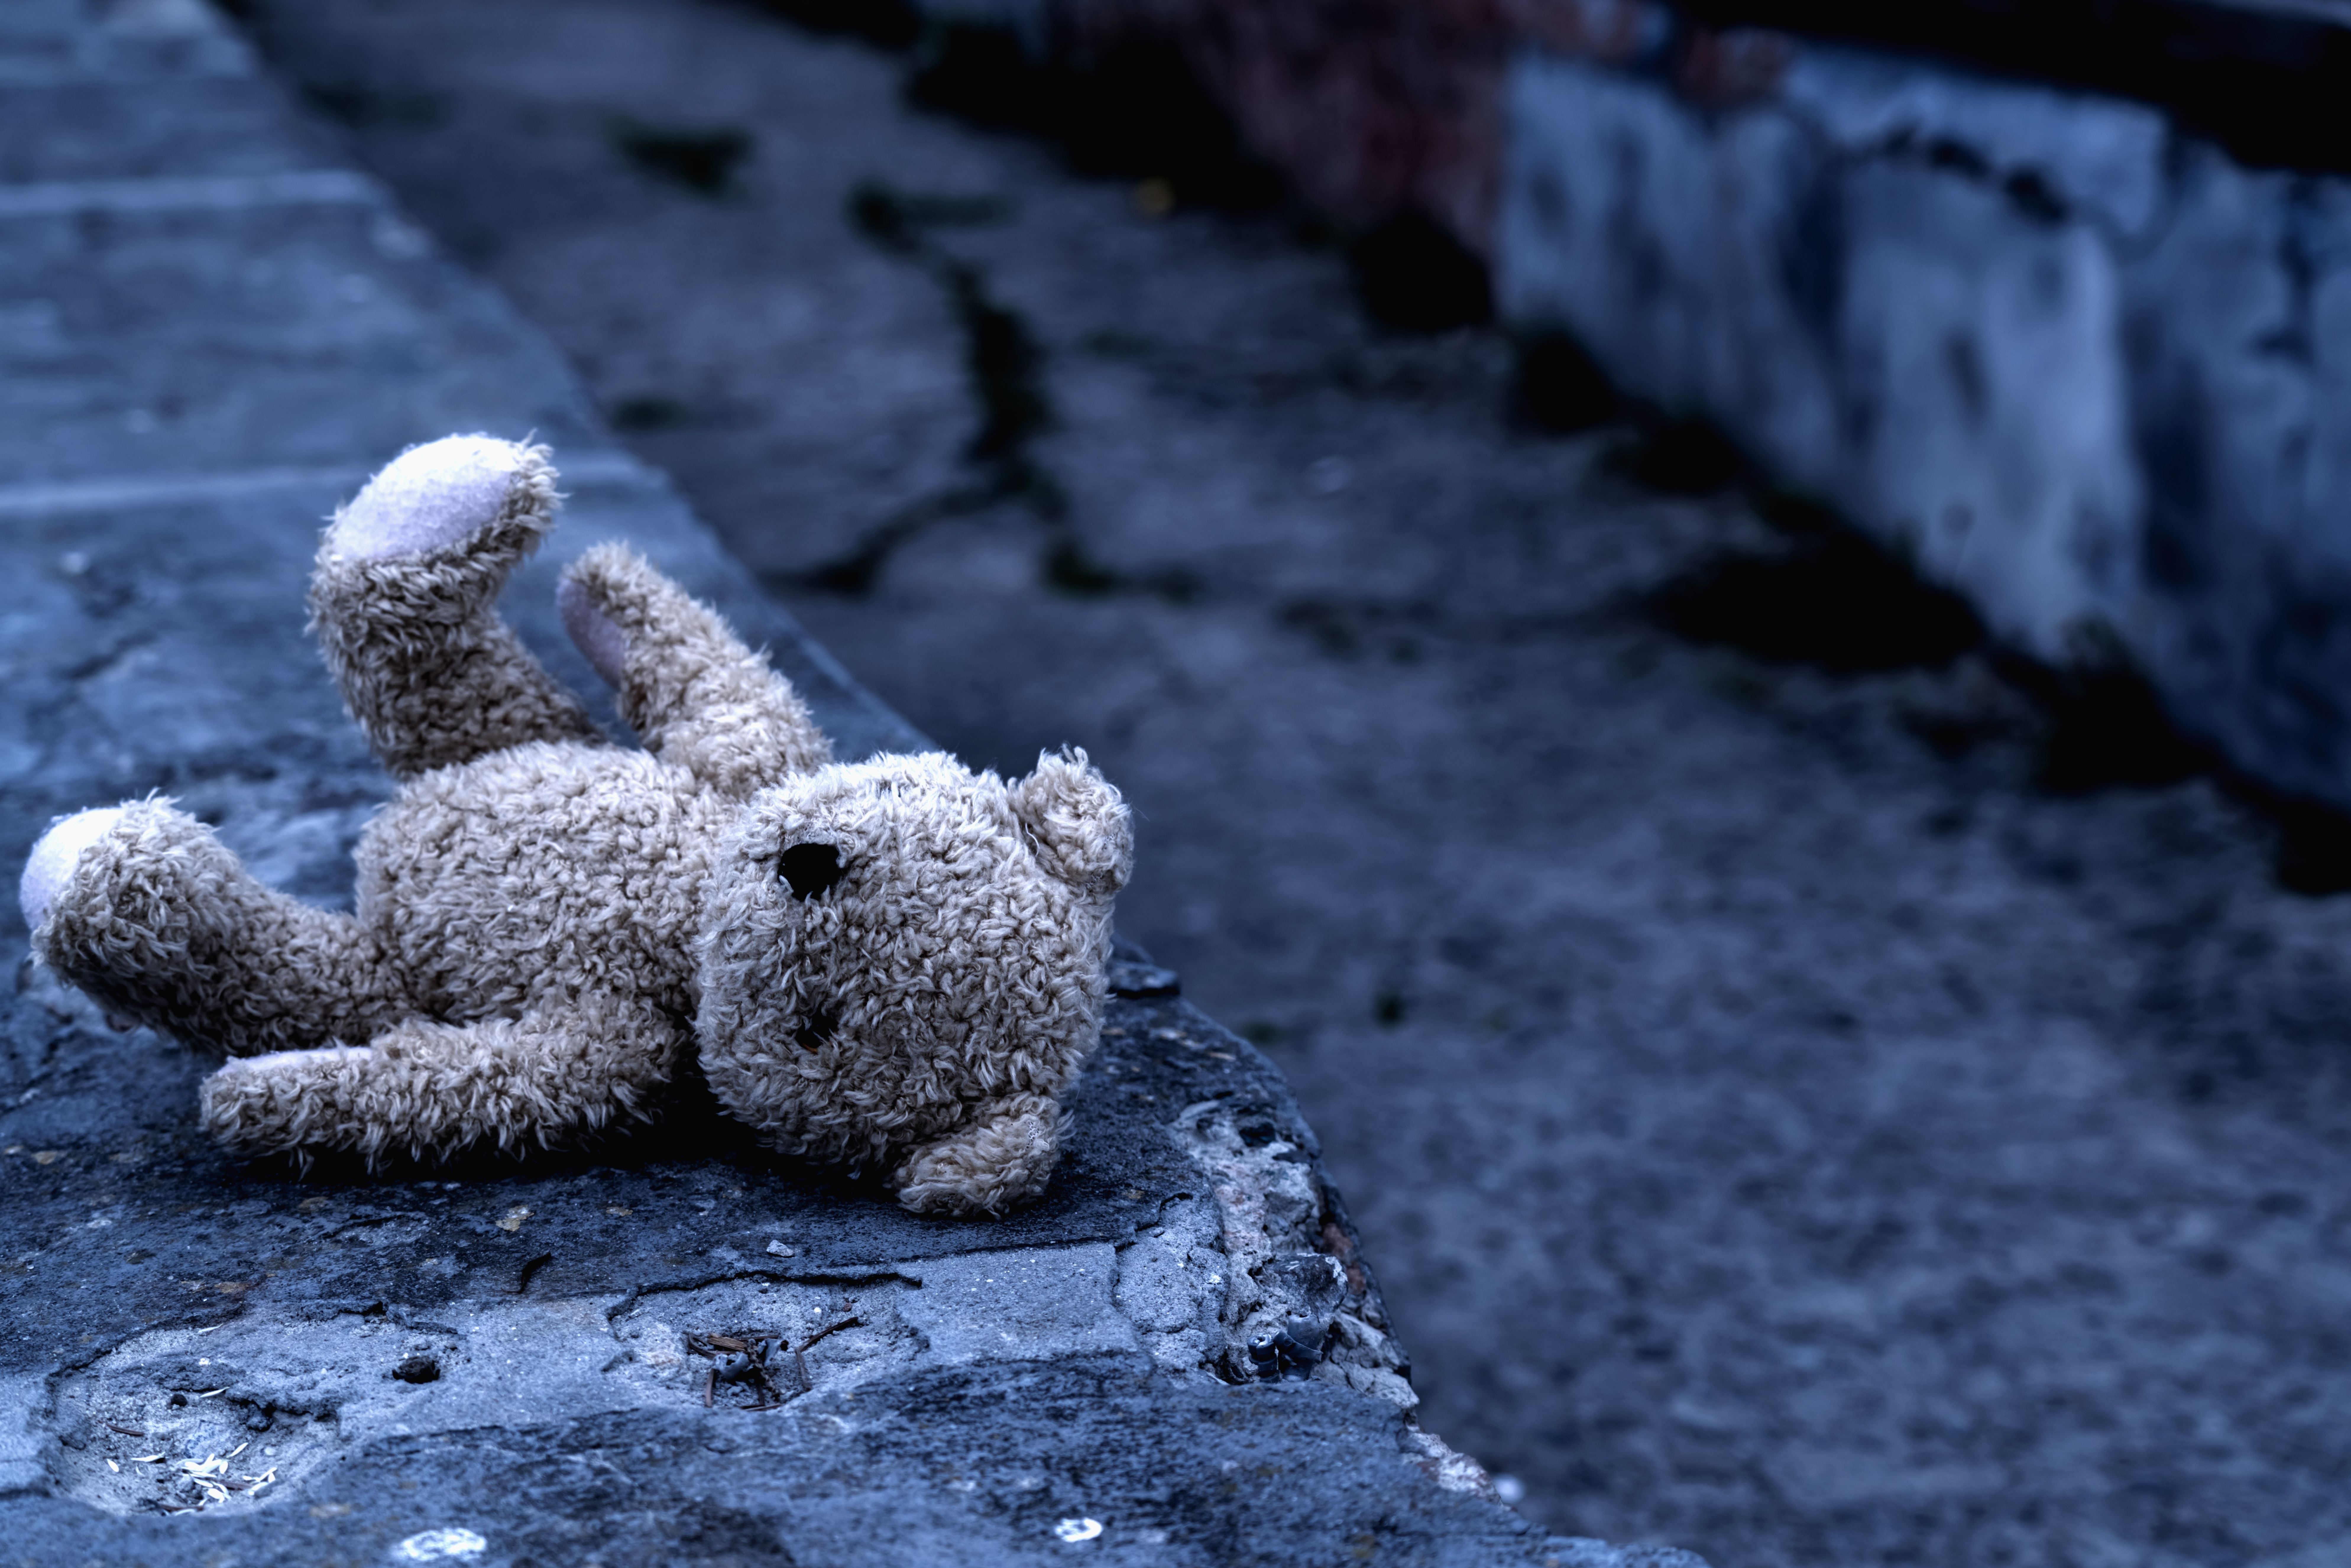 Institutional abuse: teddy on the floor